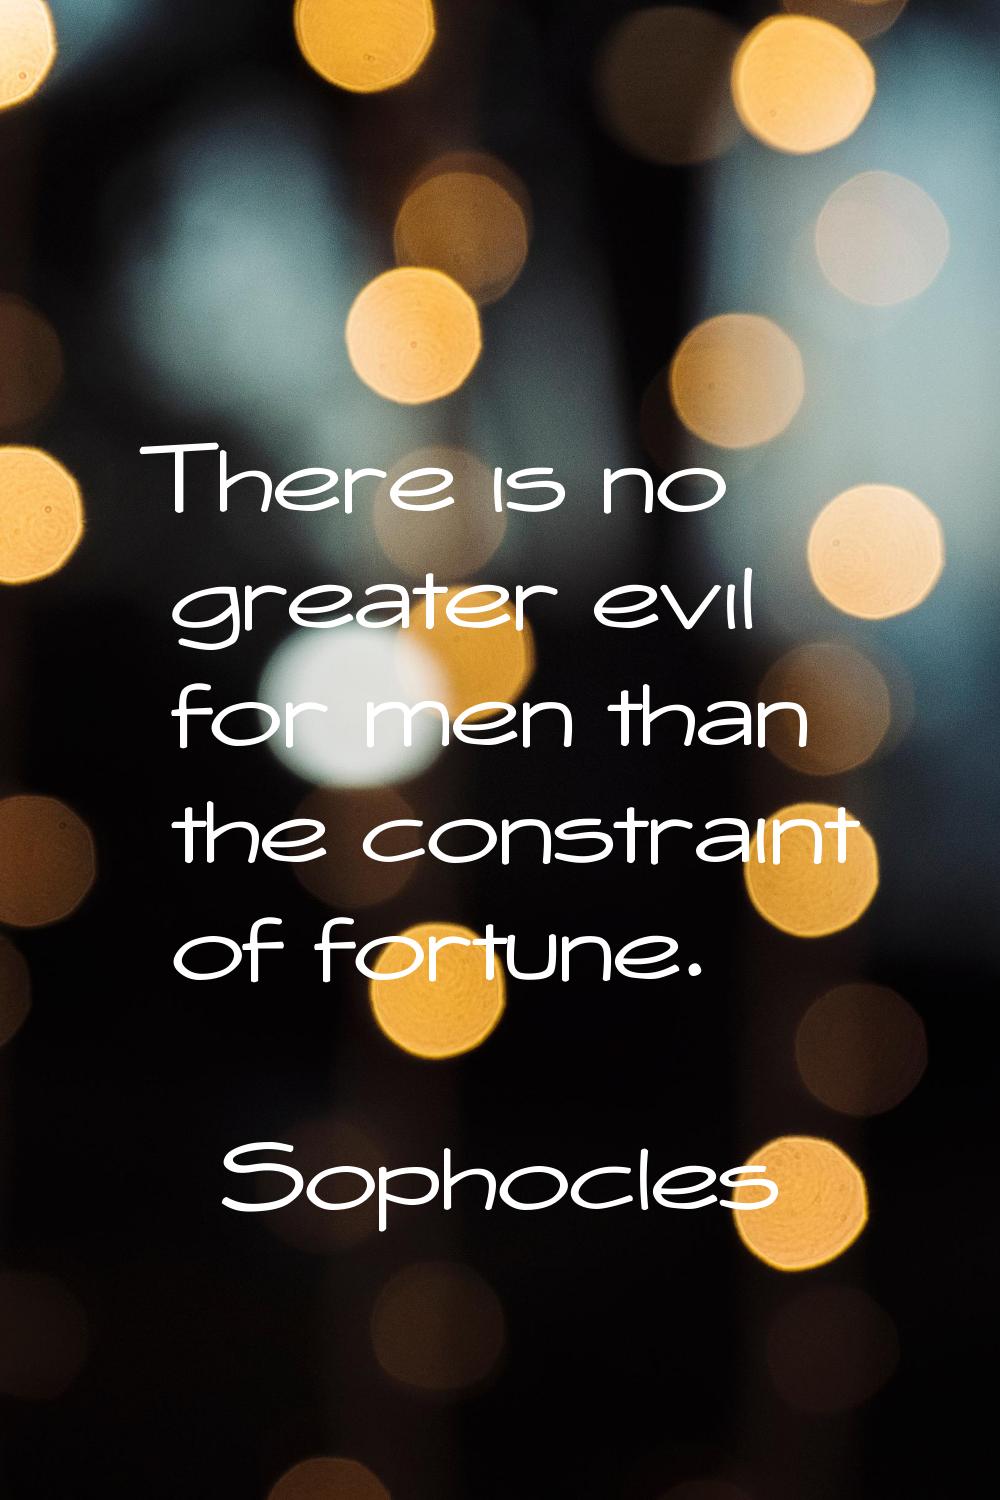 There is no greater evil for men than the constraint of fortune.